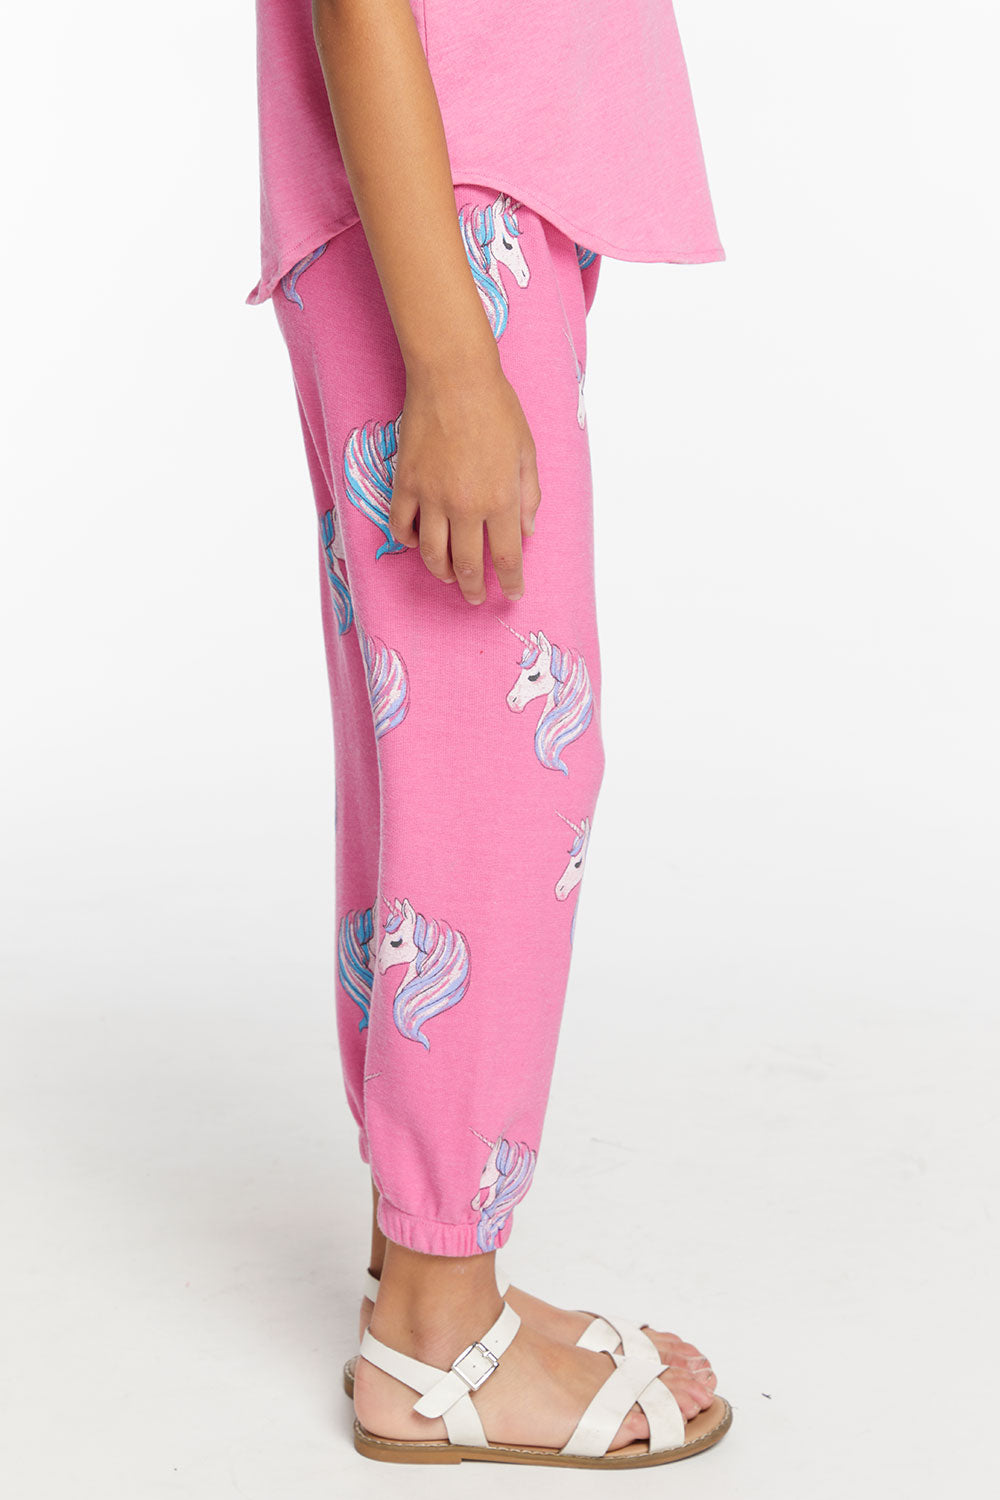 All Over Unicorn Girls Cozy Knit Sweatpant GIRLS chaserbrand